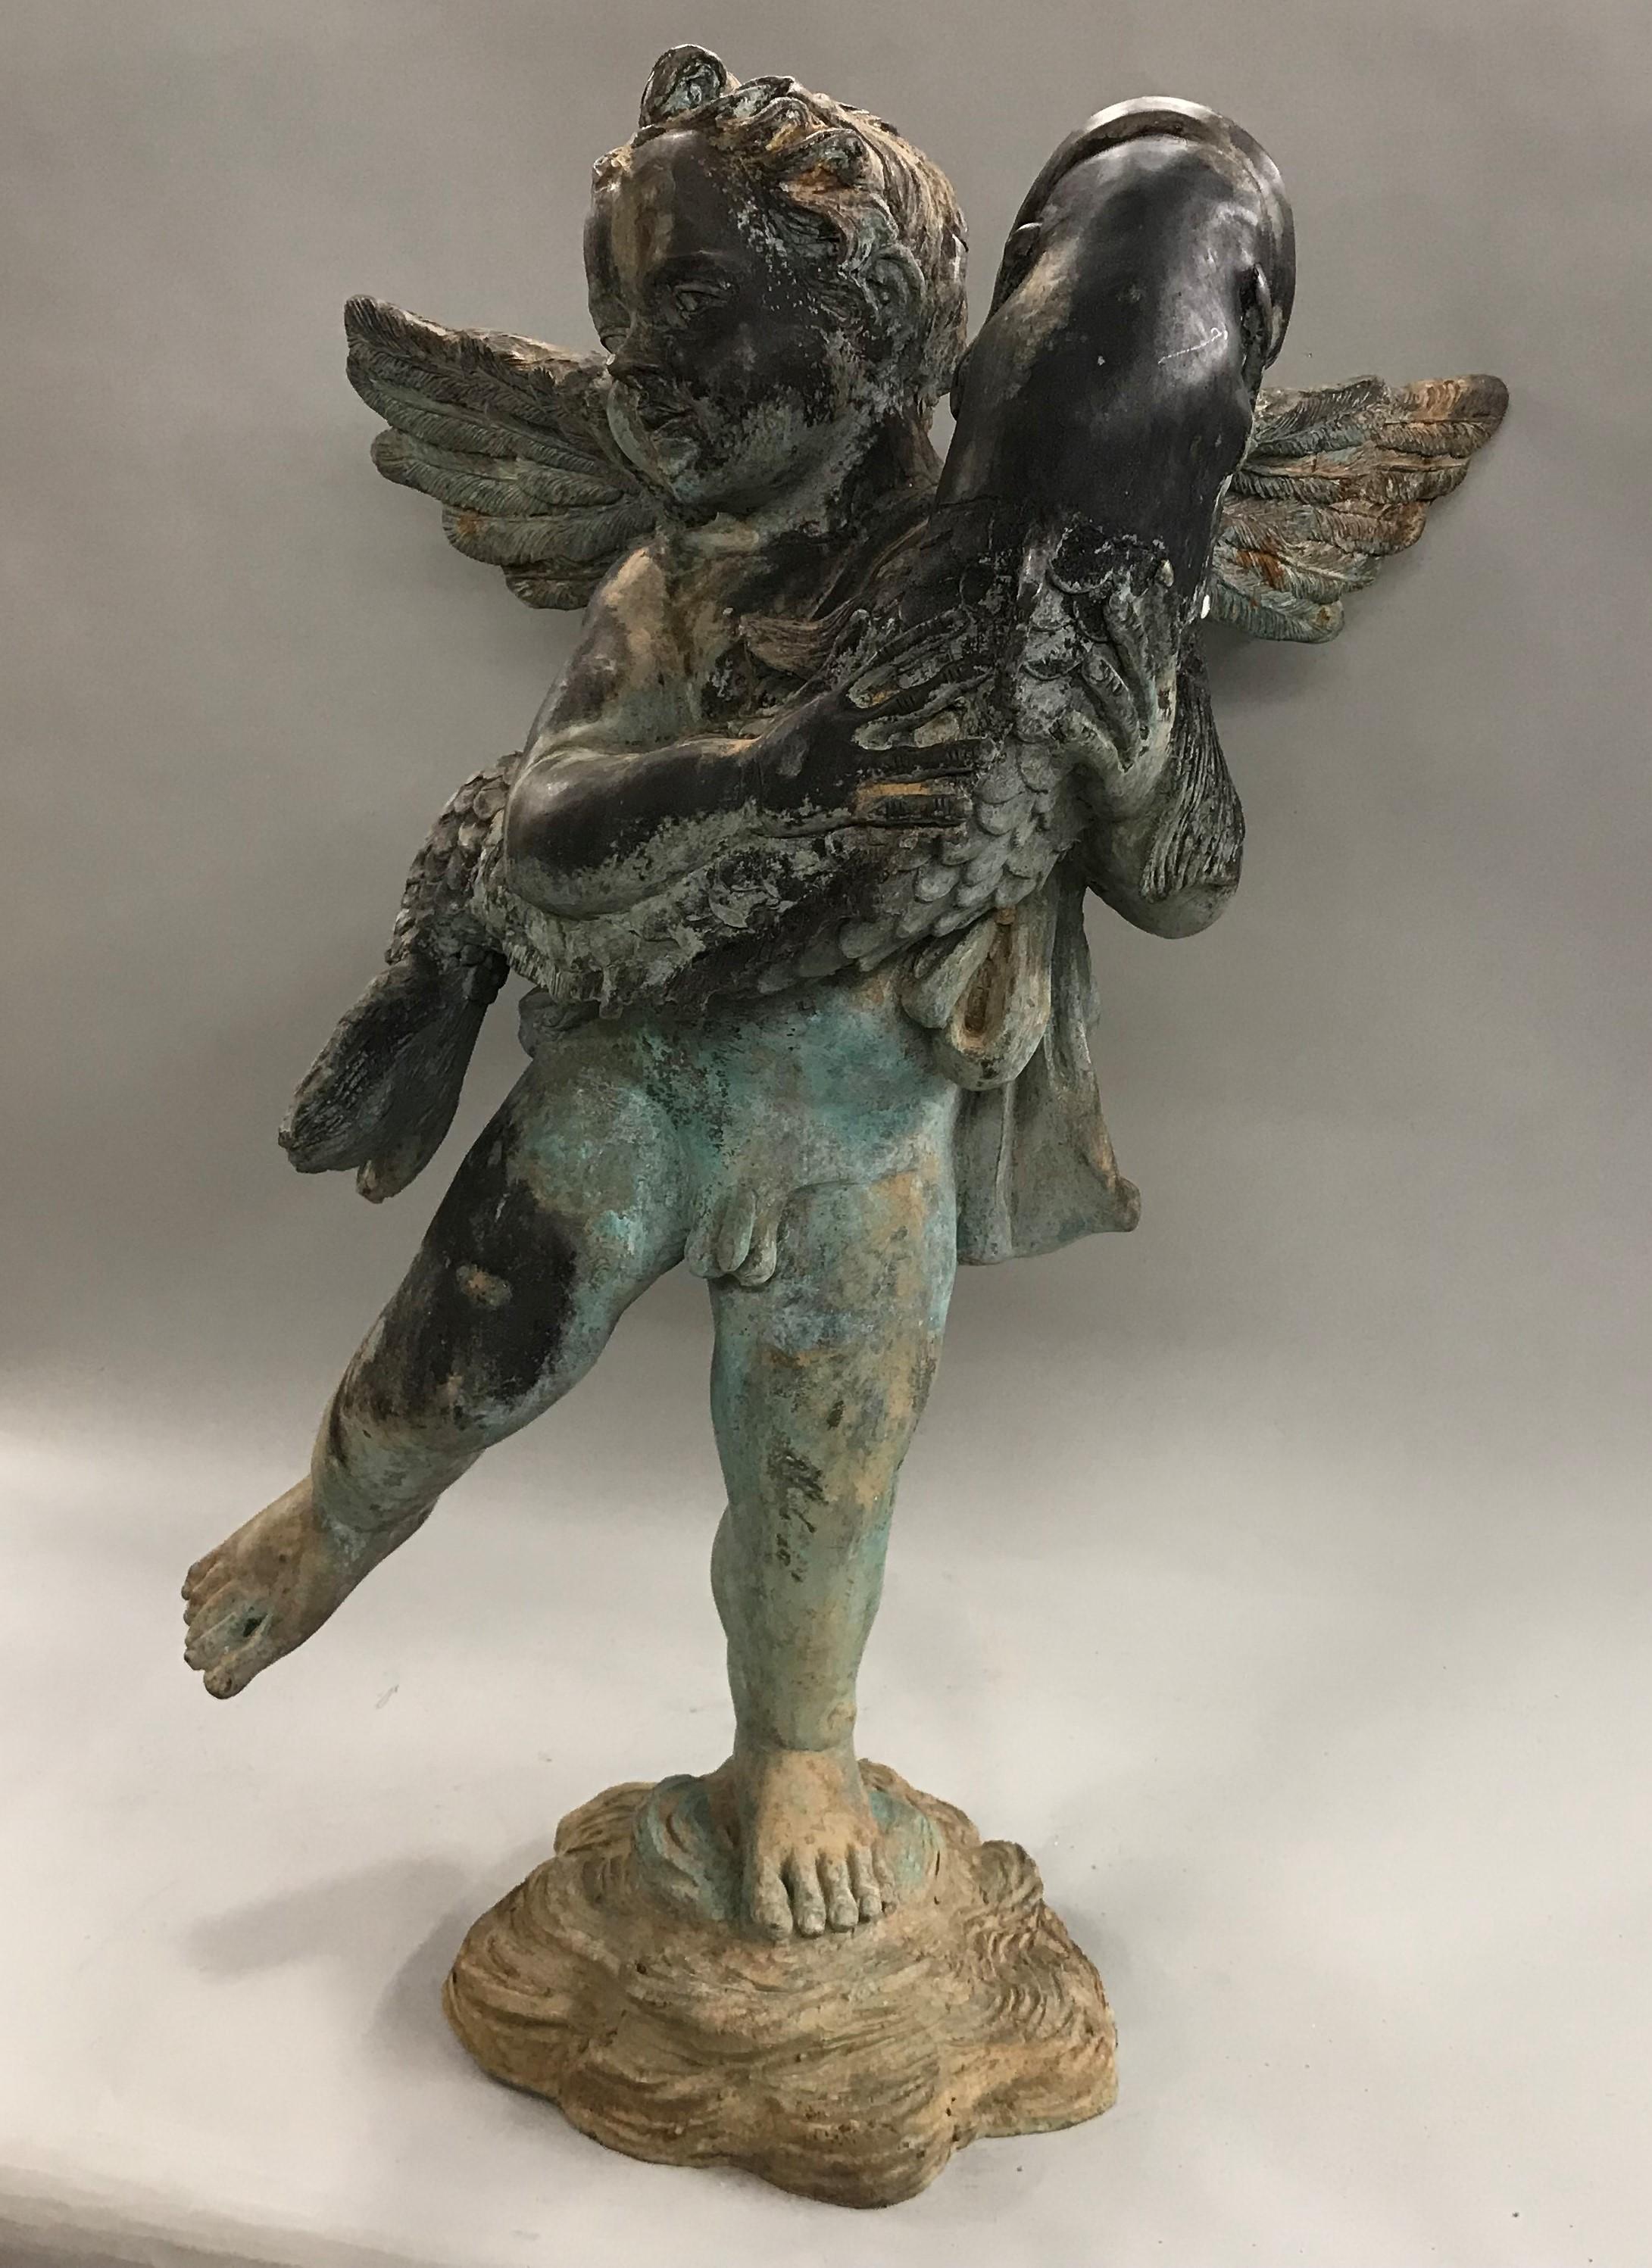 A fine French style cast iron fountain depicting a winged cherub or putti holding a large fish, dating to the 20th century. Great overall patina, with minor soiling, spot rusting, and expected wear from exterior use. Dimensions: 30.5 in H x 25 in W